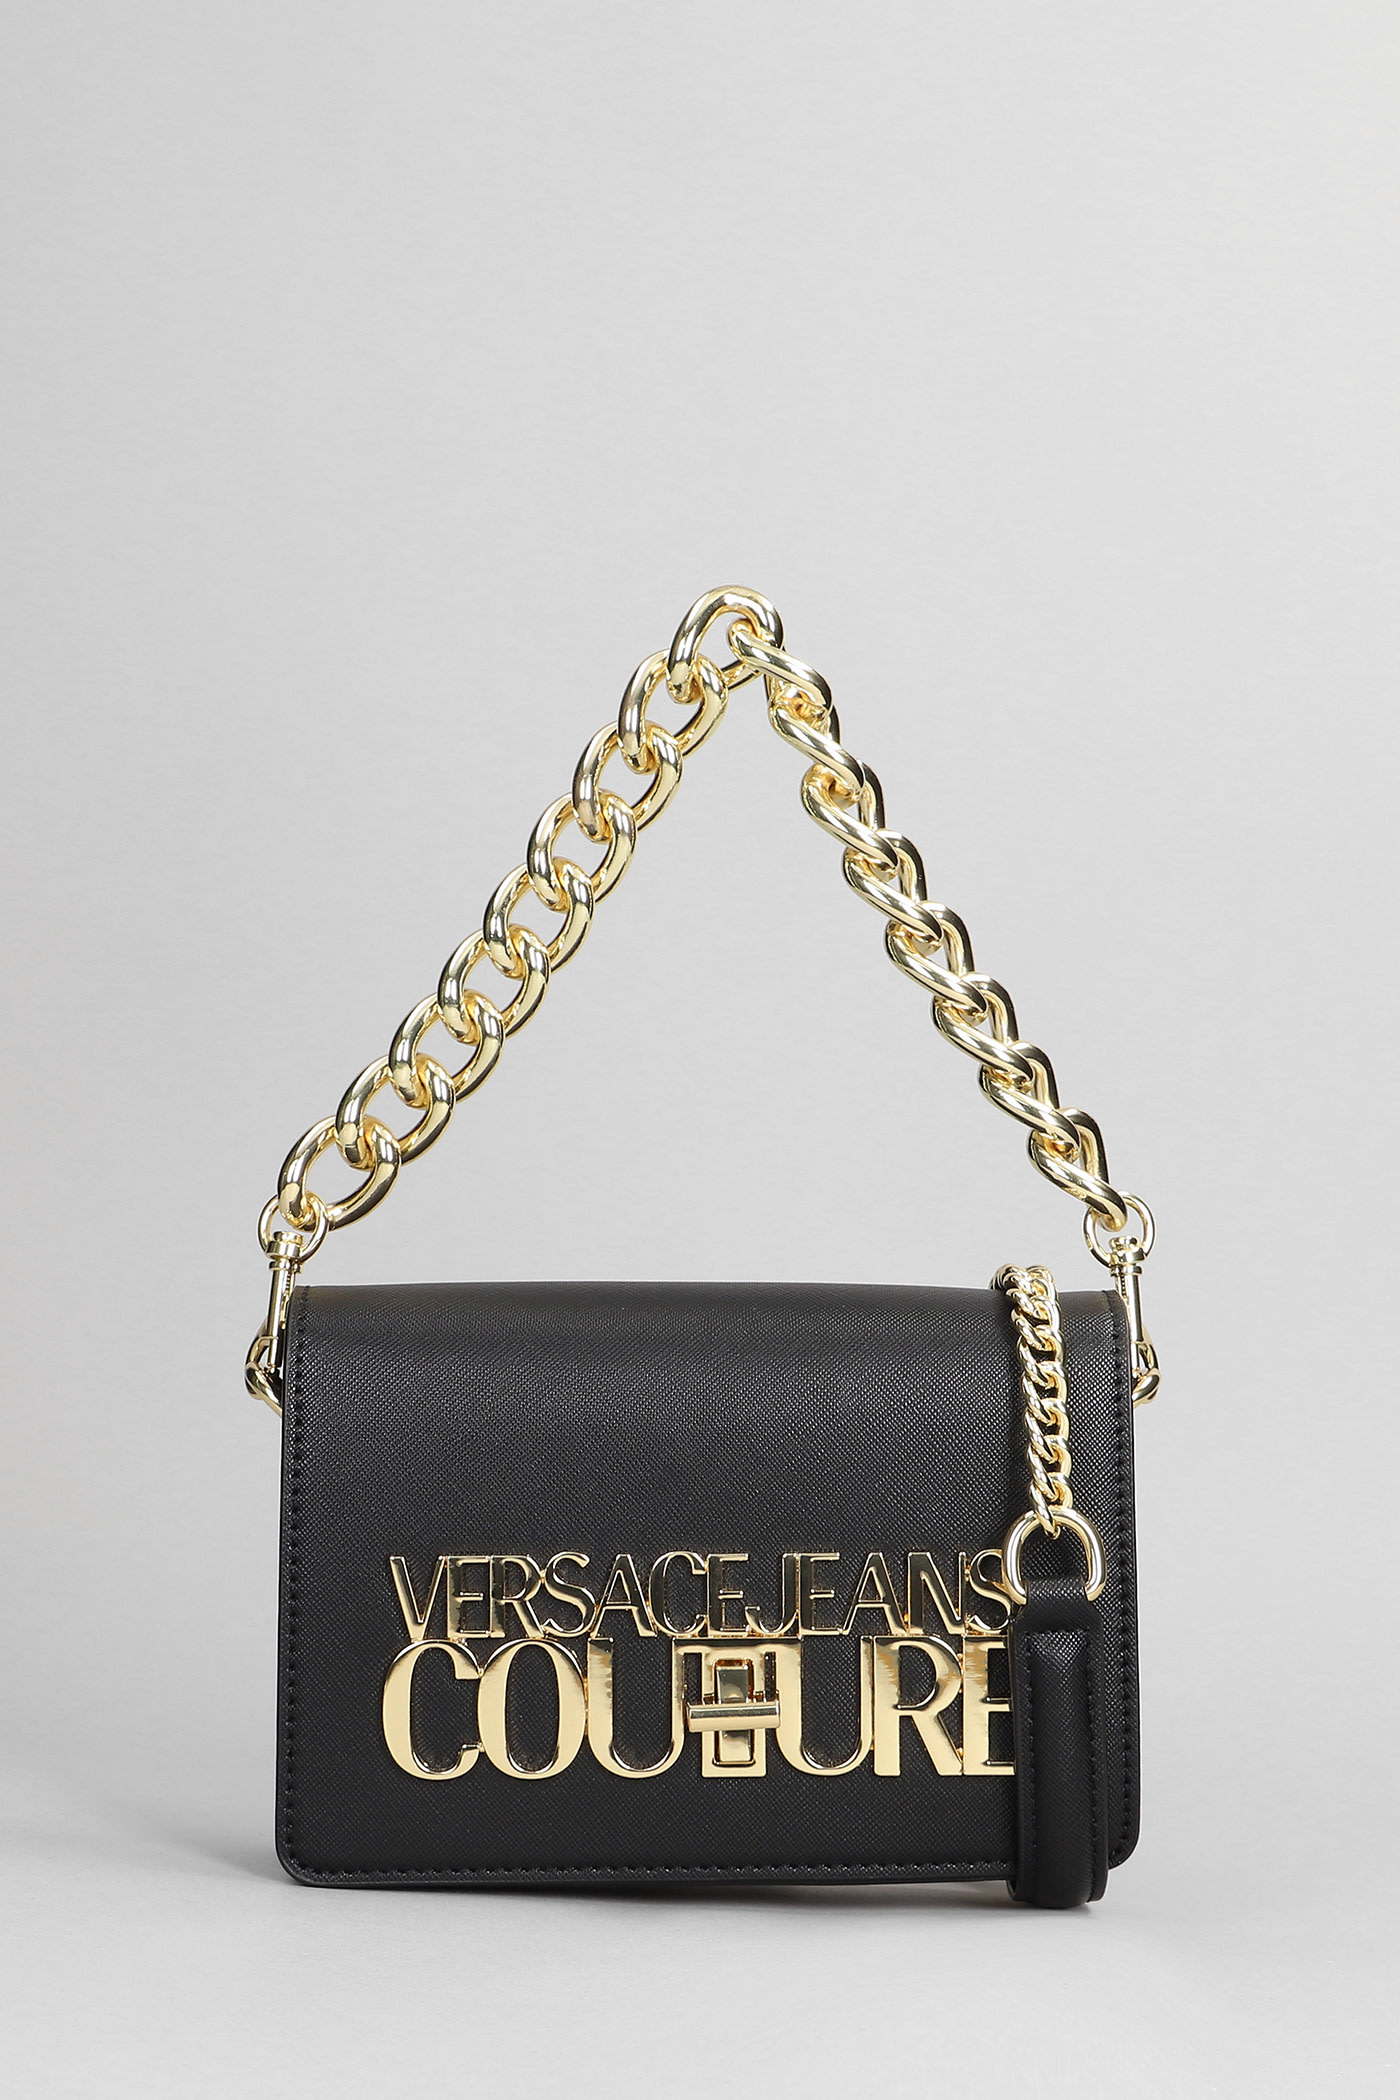 VERSACE JEANS COUTURE SHOULDER BAG IN BLACK FAUX LEATHER